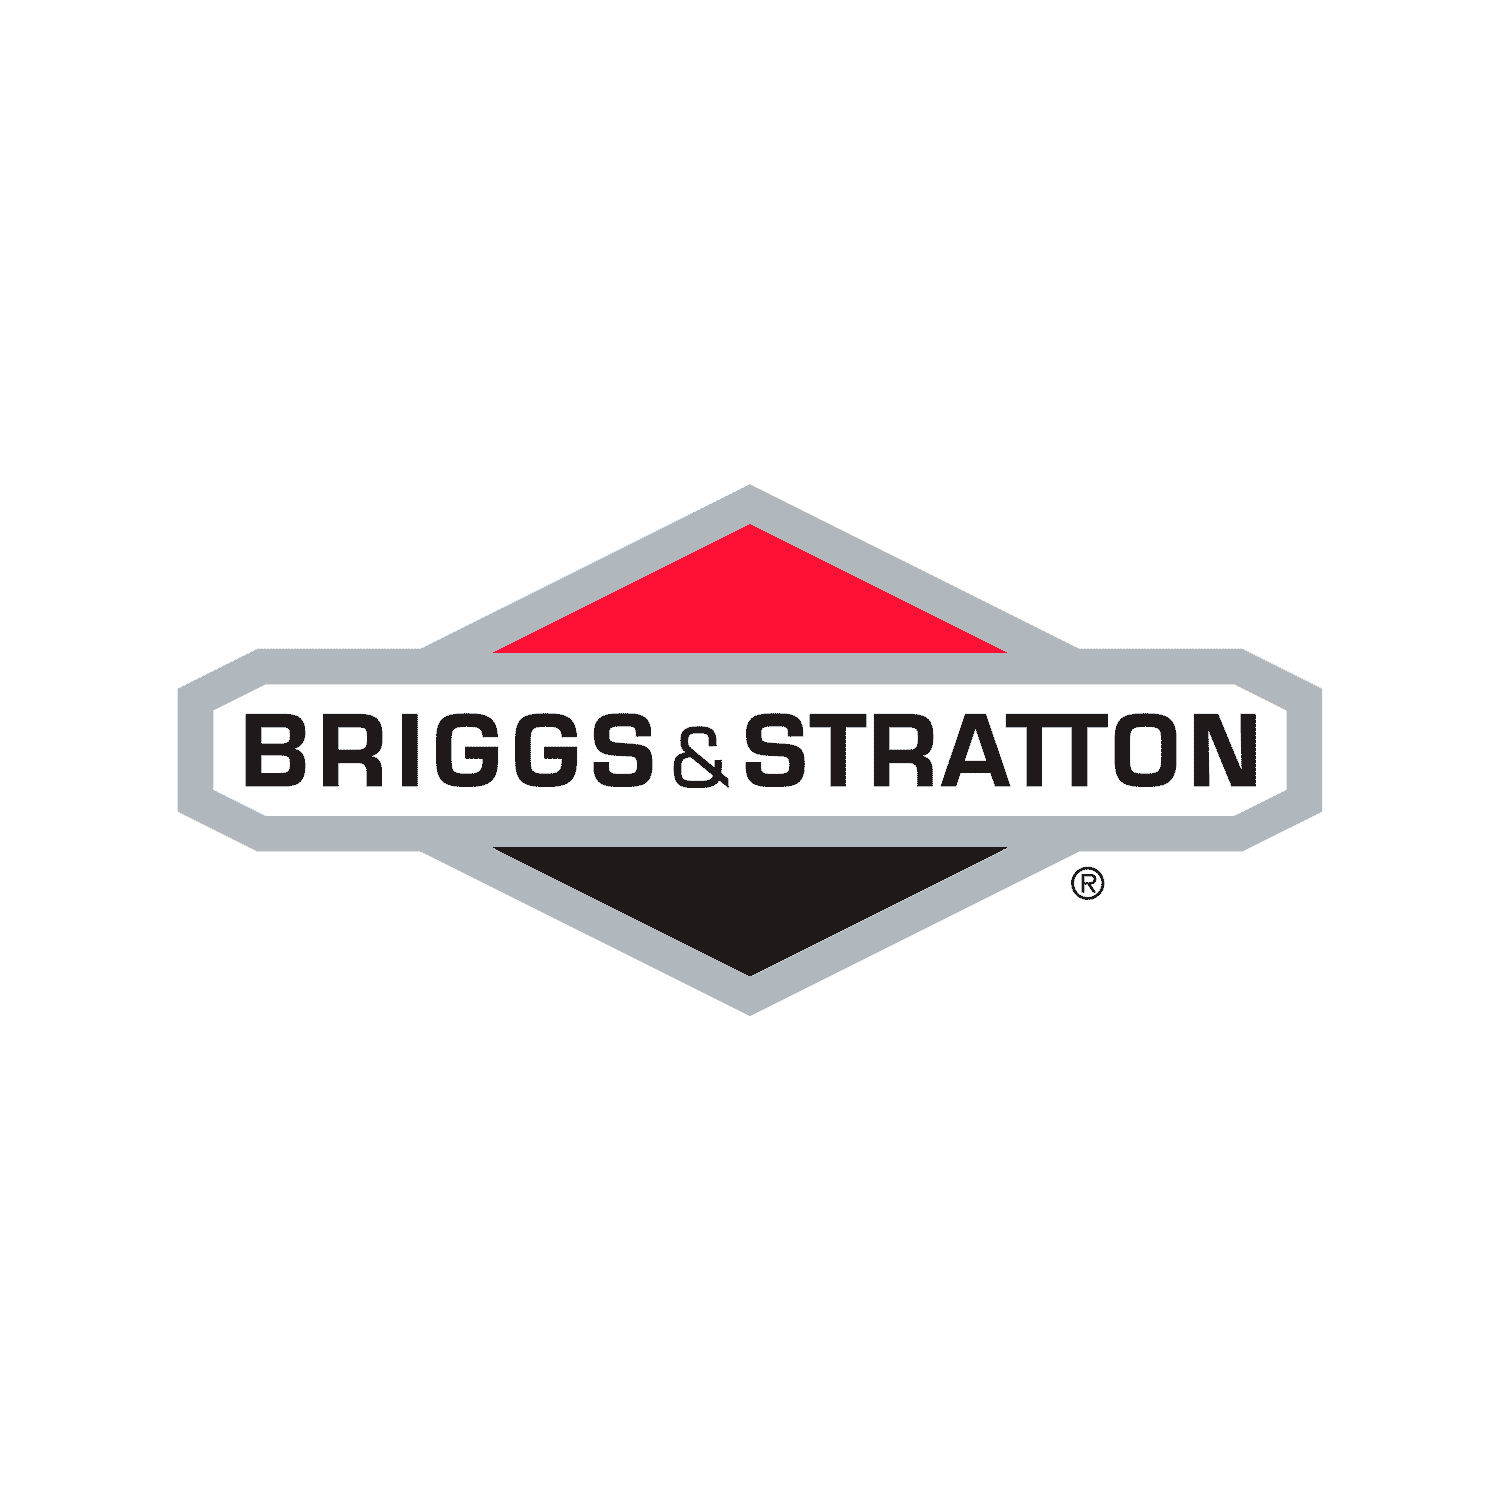 Briggs & Stratton Genuine 845503 LINE-FUEL Replacement Part Lawnmower - image 2 of 2